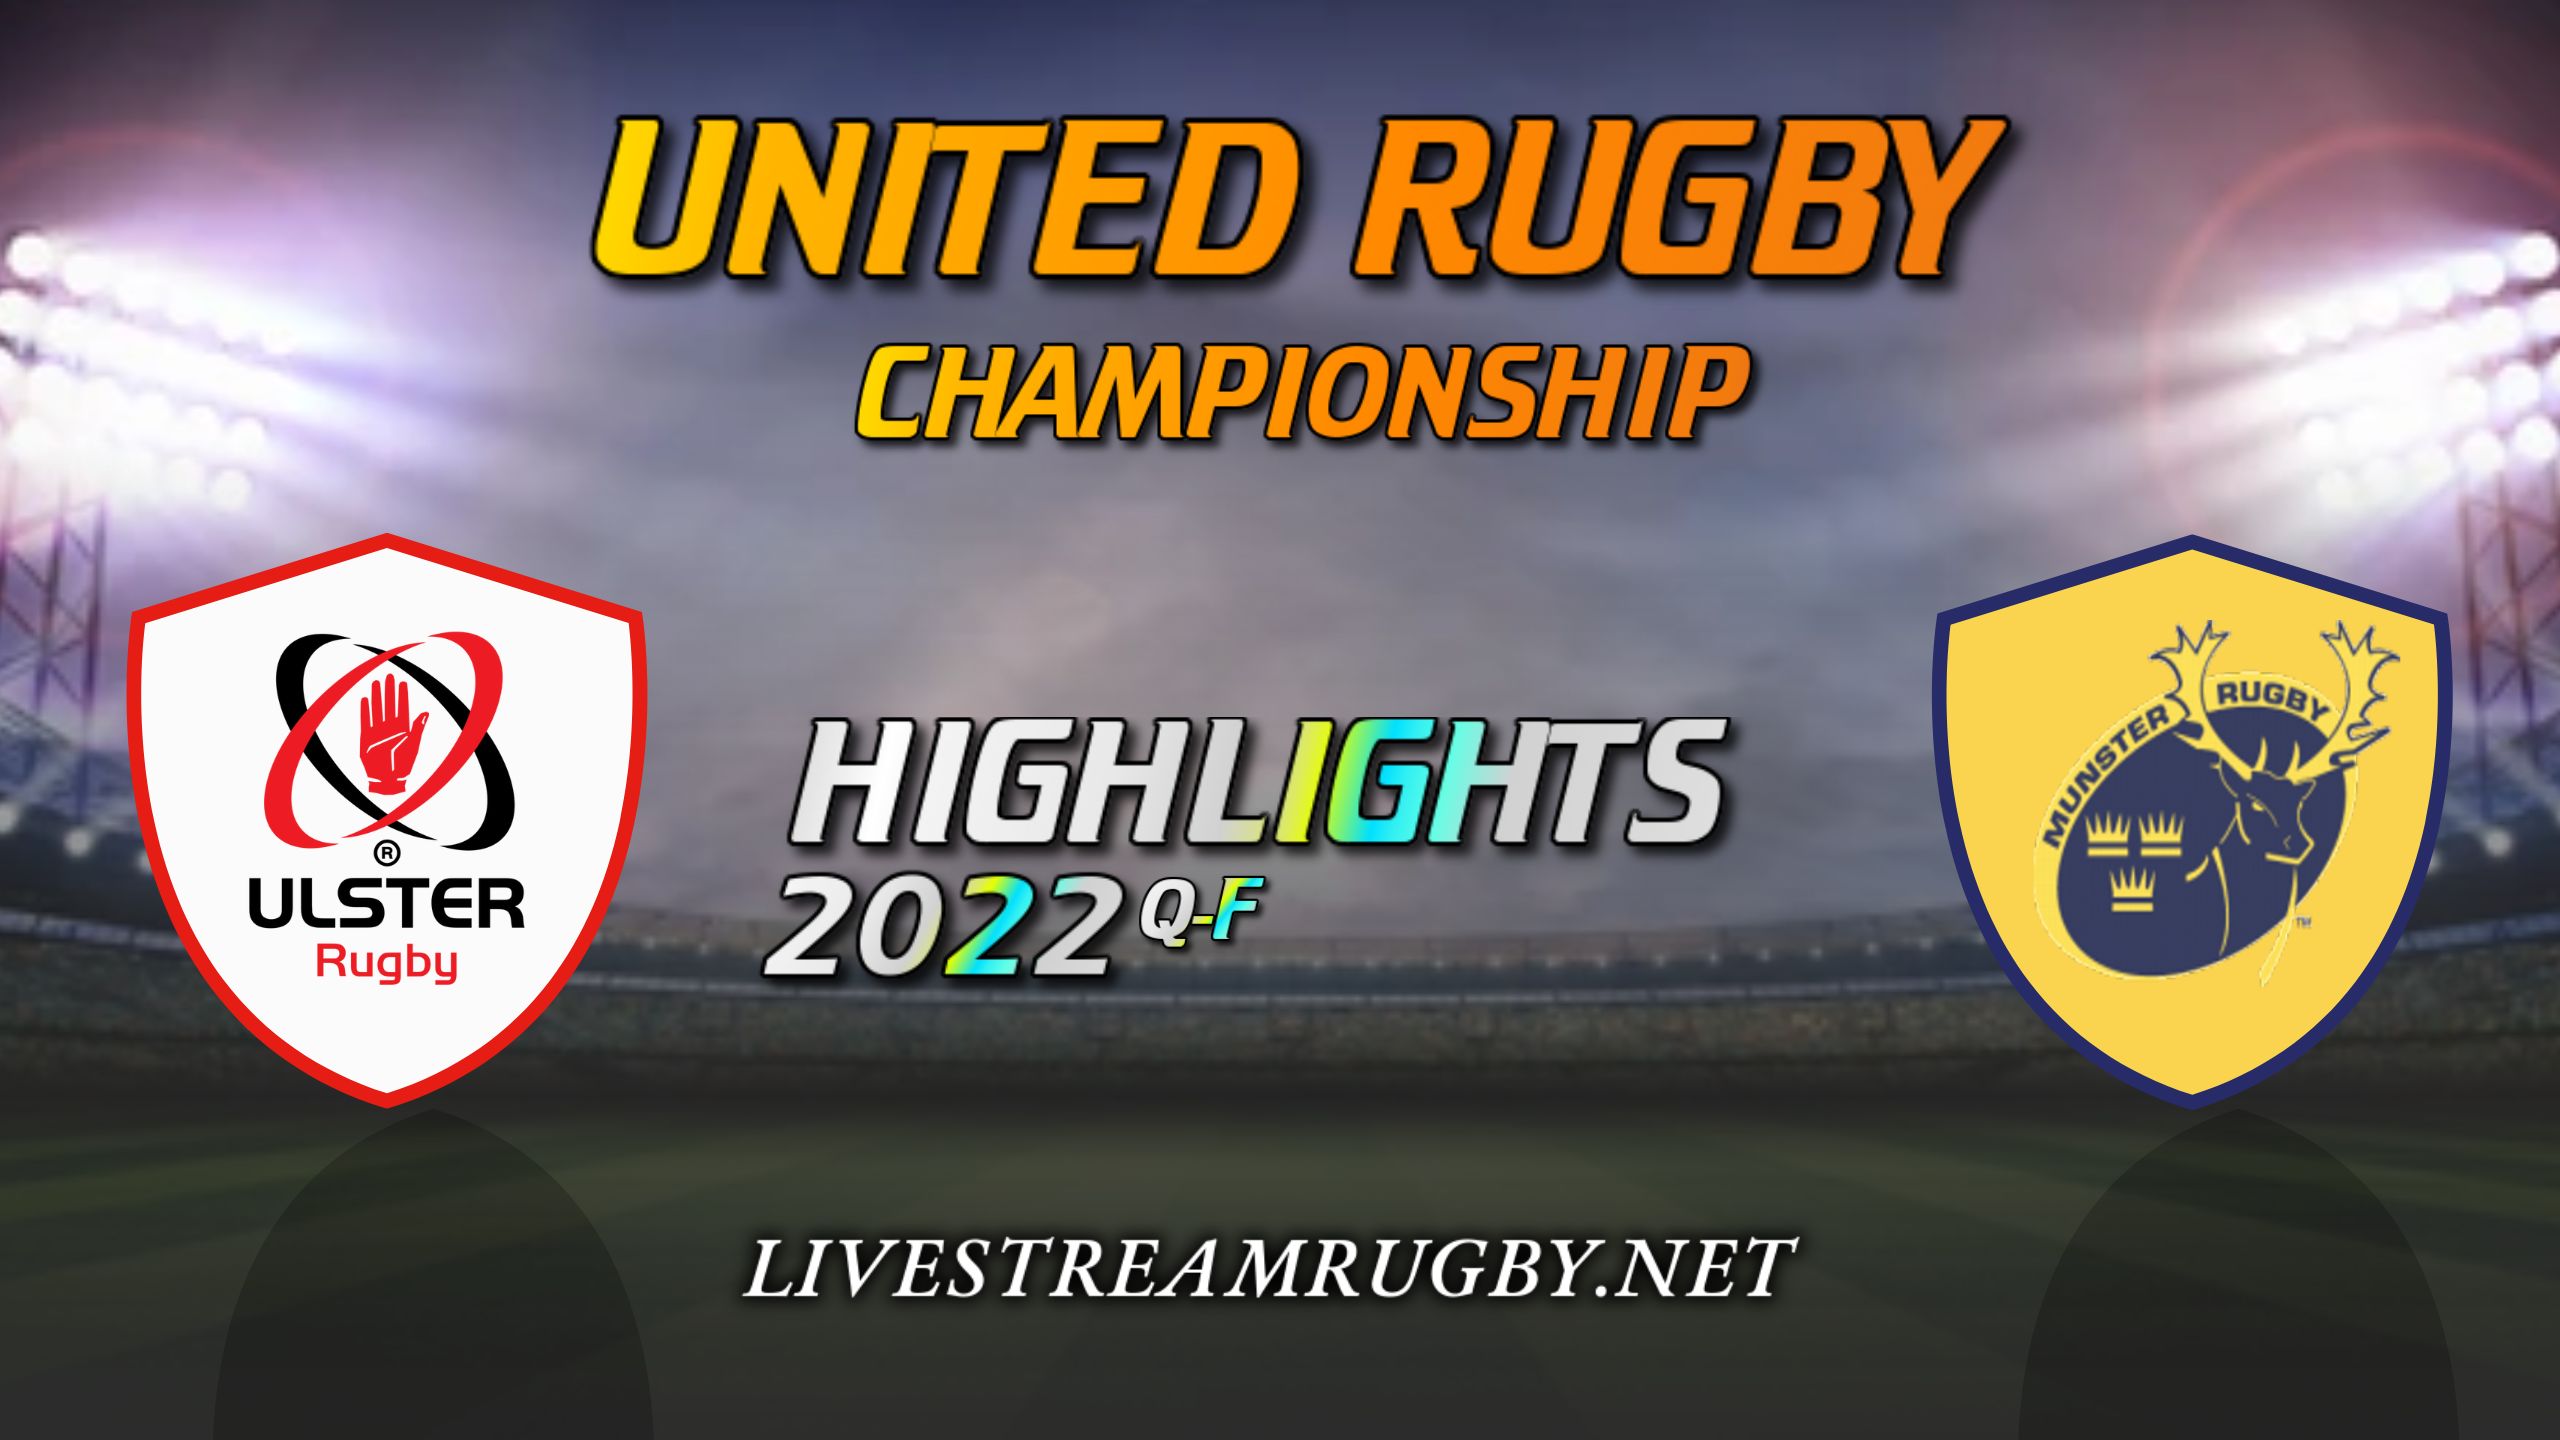 Ulster Vs Munster Highlights 2022 QF United Rugby